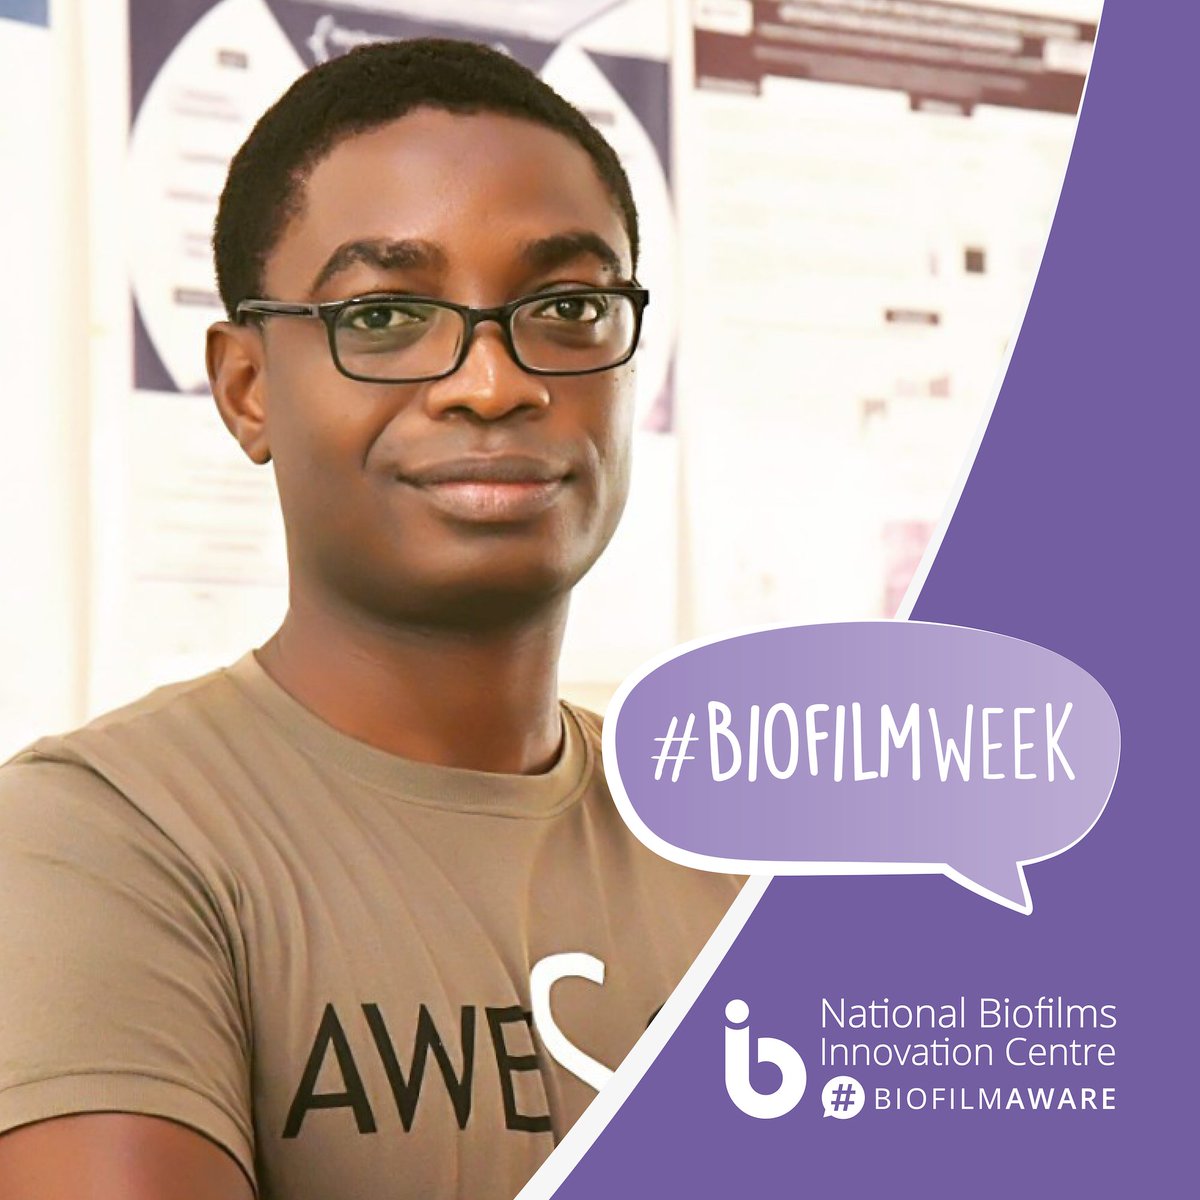 Lead #AMR Fighter @IsawumiAbiola has been profiled by @ukbiofilms. He provided info on how @WACCBIP_UG is leading a successful fight against #AMR in Ghana. Congrats @WACCBIP_UG for consistent research excellence @UnivofGh @gordon_awandare @WWIEM_QUB @GlobalAMRHub #WAAW2023 #WAAW